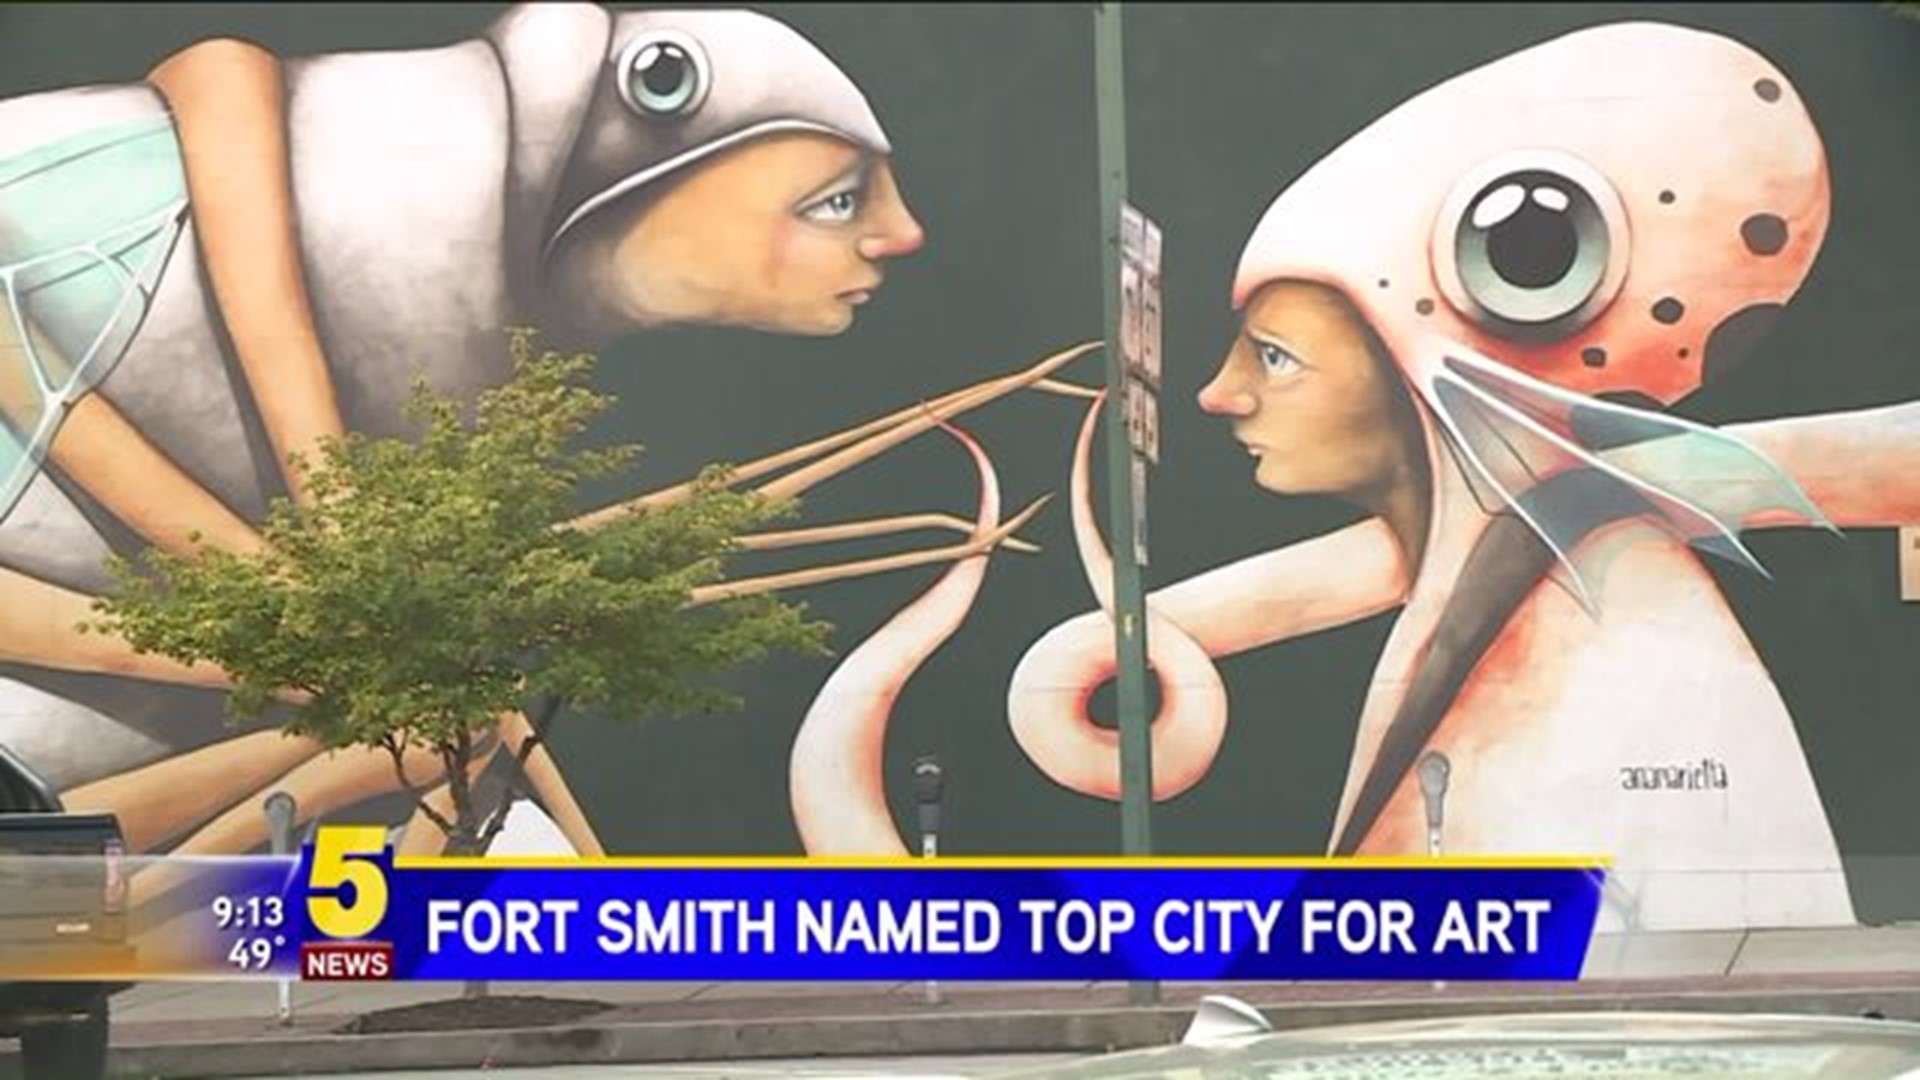 Fort Smith Named Top City For Art